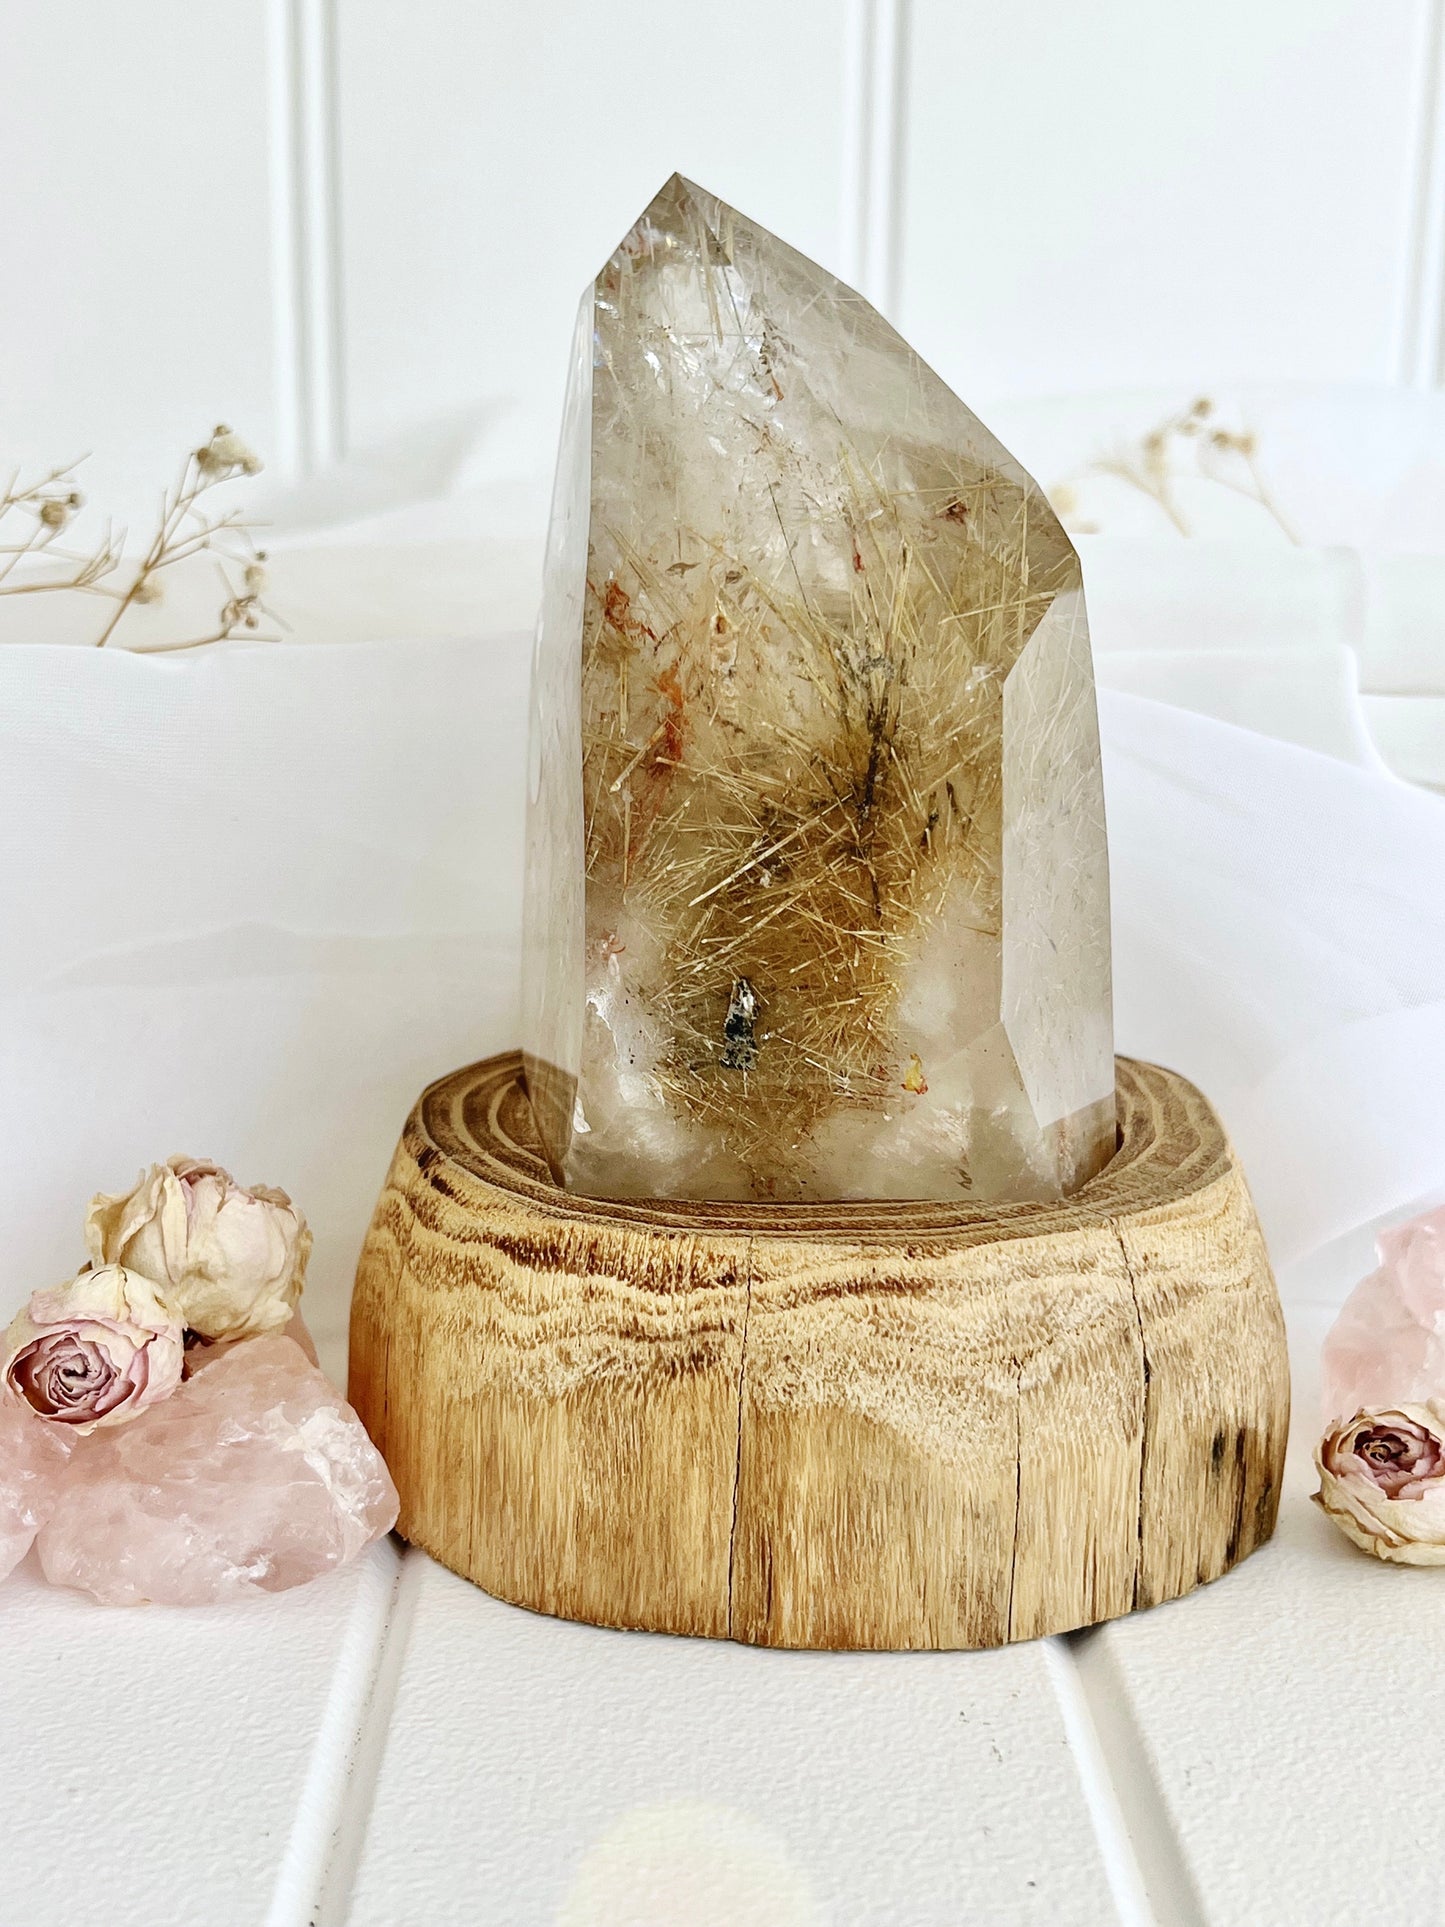 Rutile Quartz Point with Moving Enhydro Bubble & Stand 219